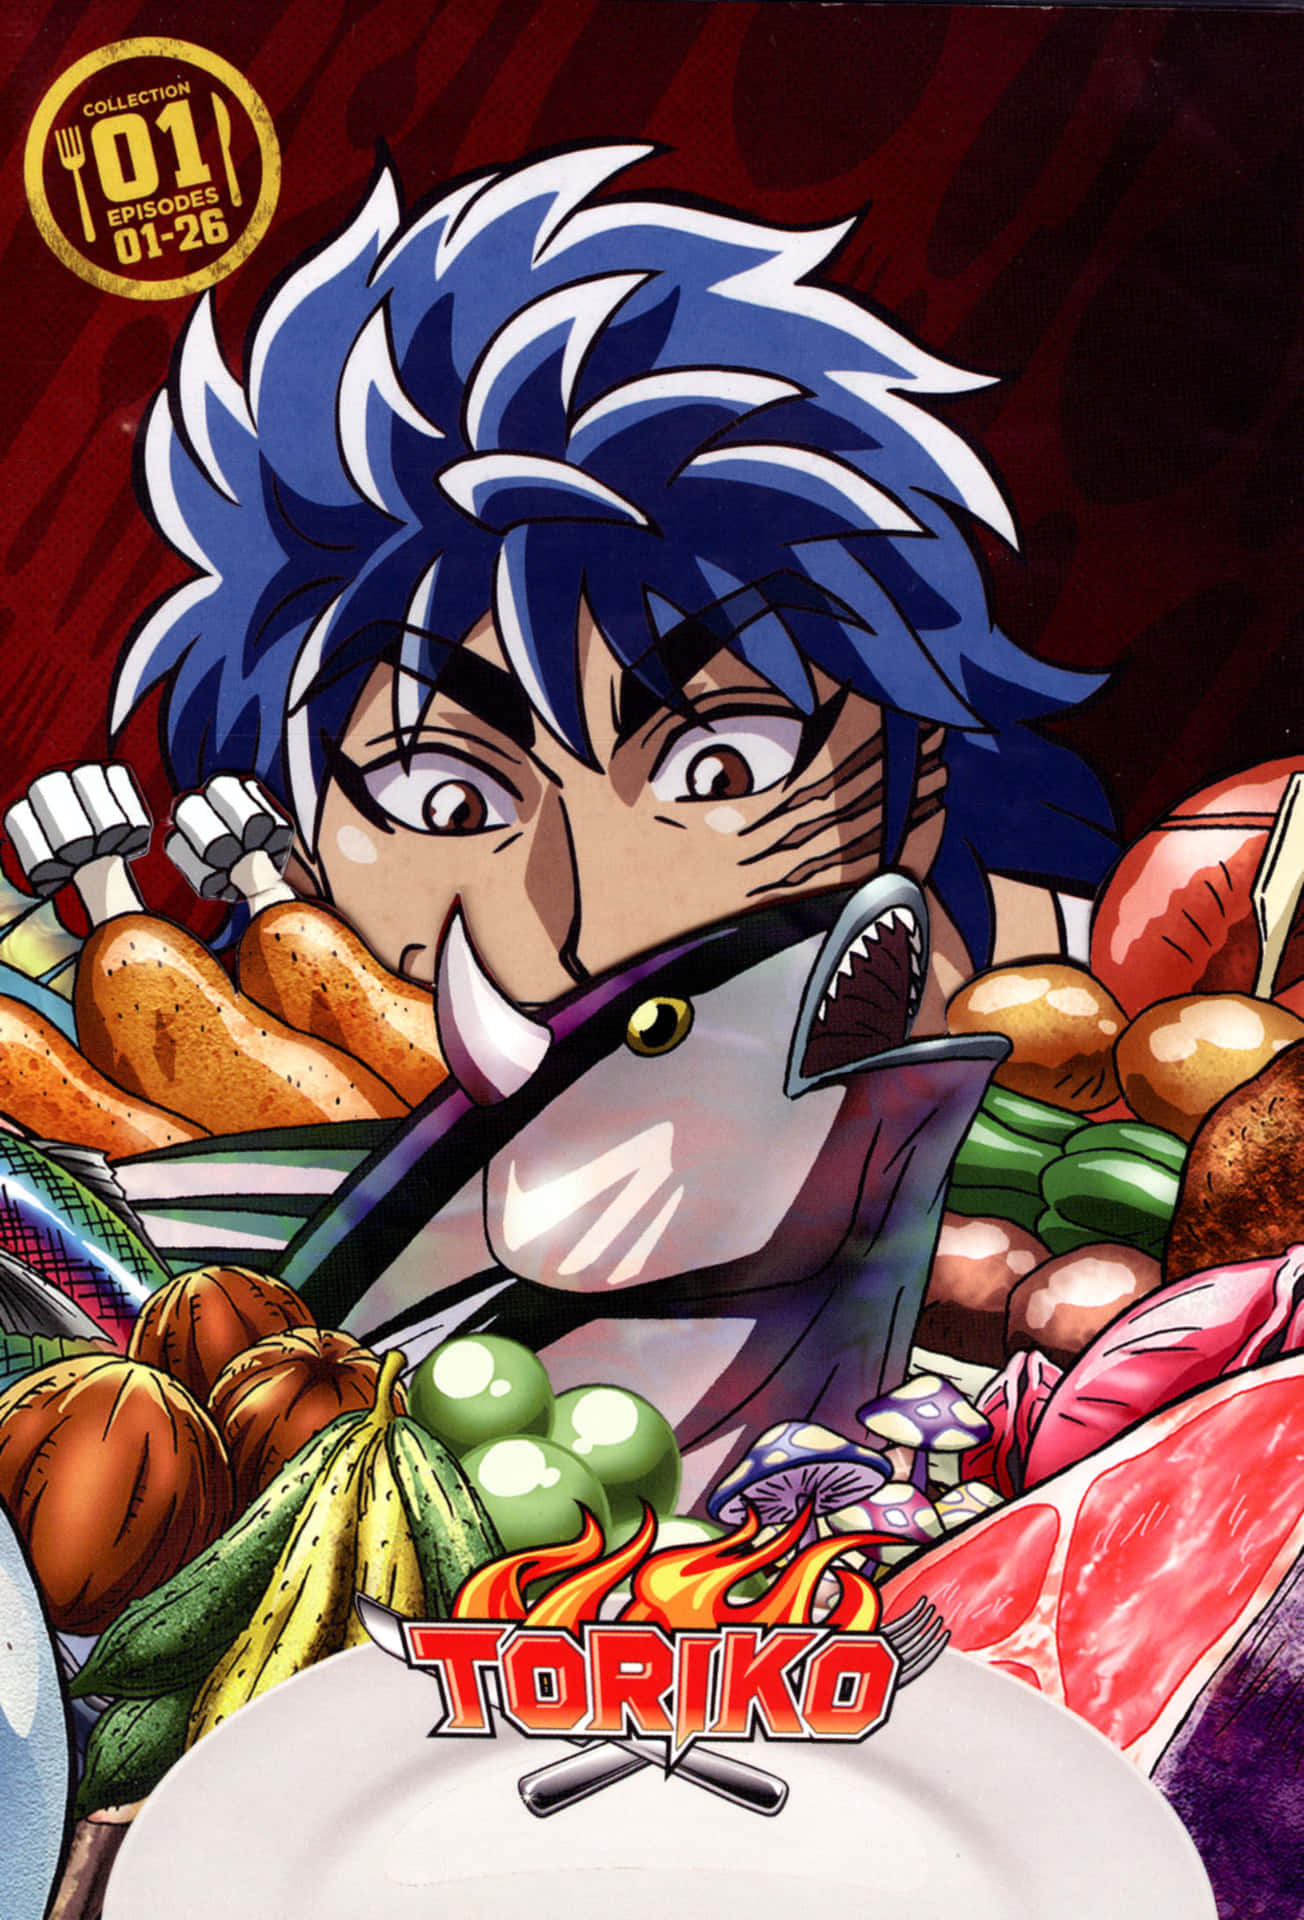 Enjoy the time spent with Toriko, the world's greatest gourmet hunter! Wallpaper